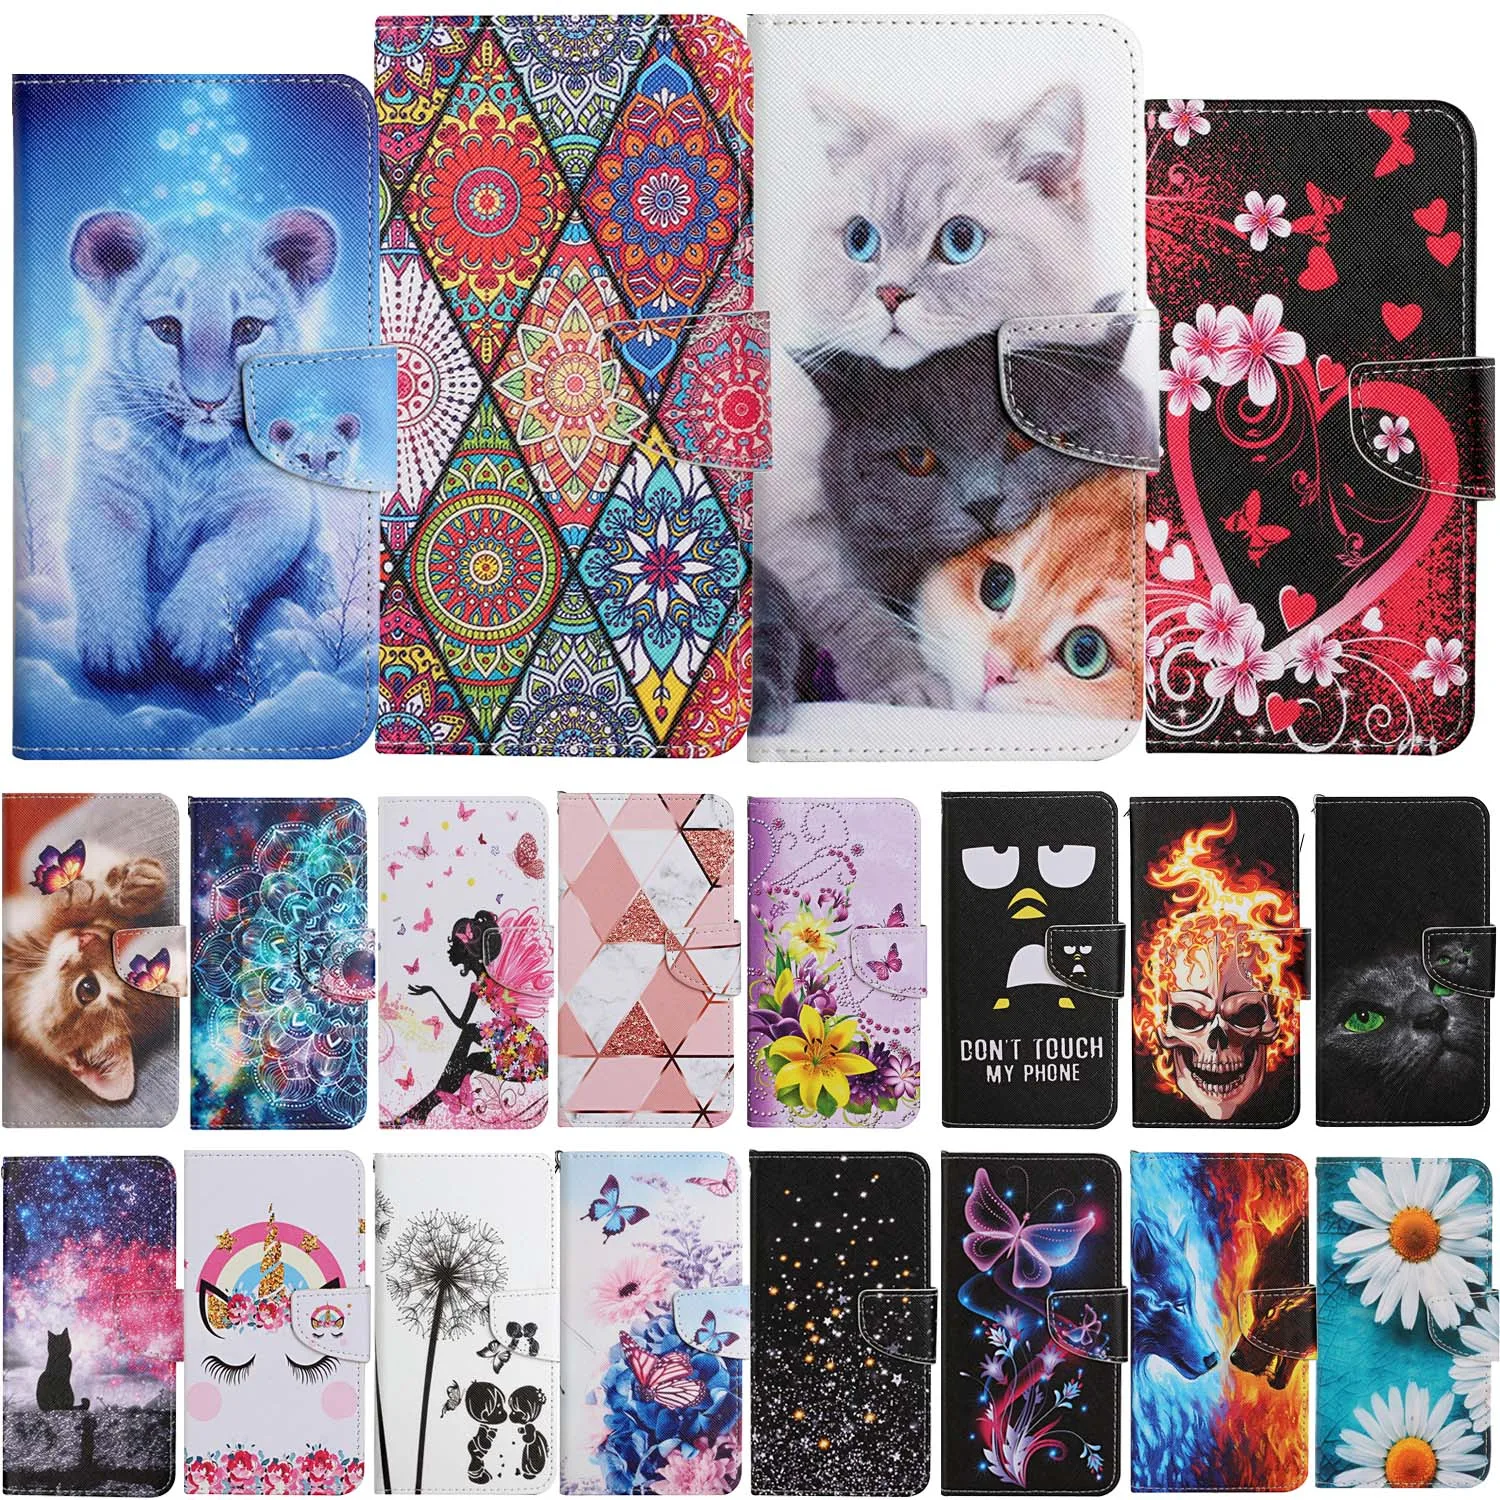 

Cute Flower Cat Painted Case For Huawei Honor 7S 8S 8A 9A Honor 20 10 10X 9X Lite P Smart 2021 Leather Flip Wallet Phone Cover